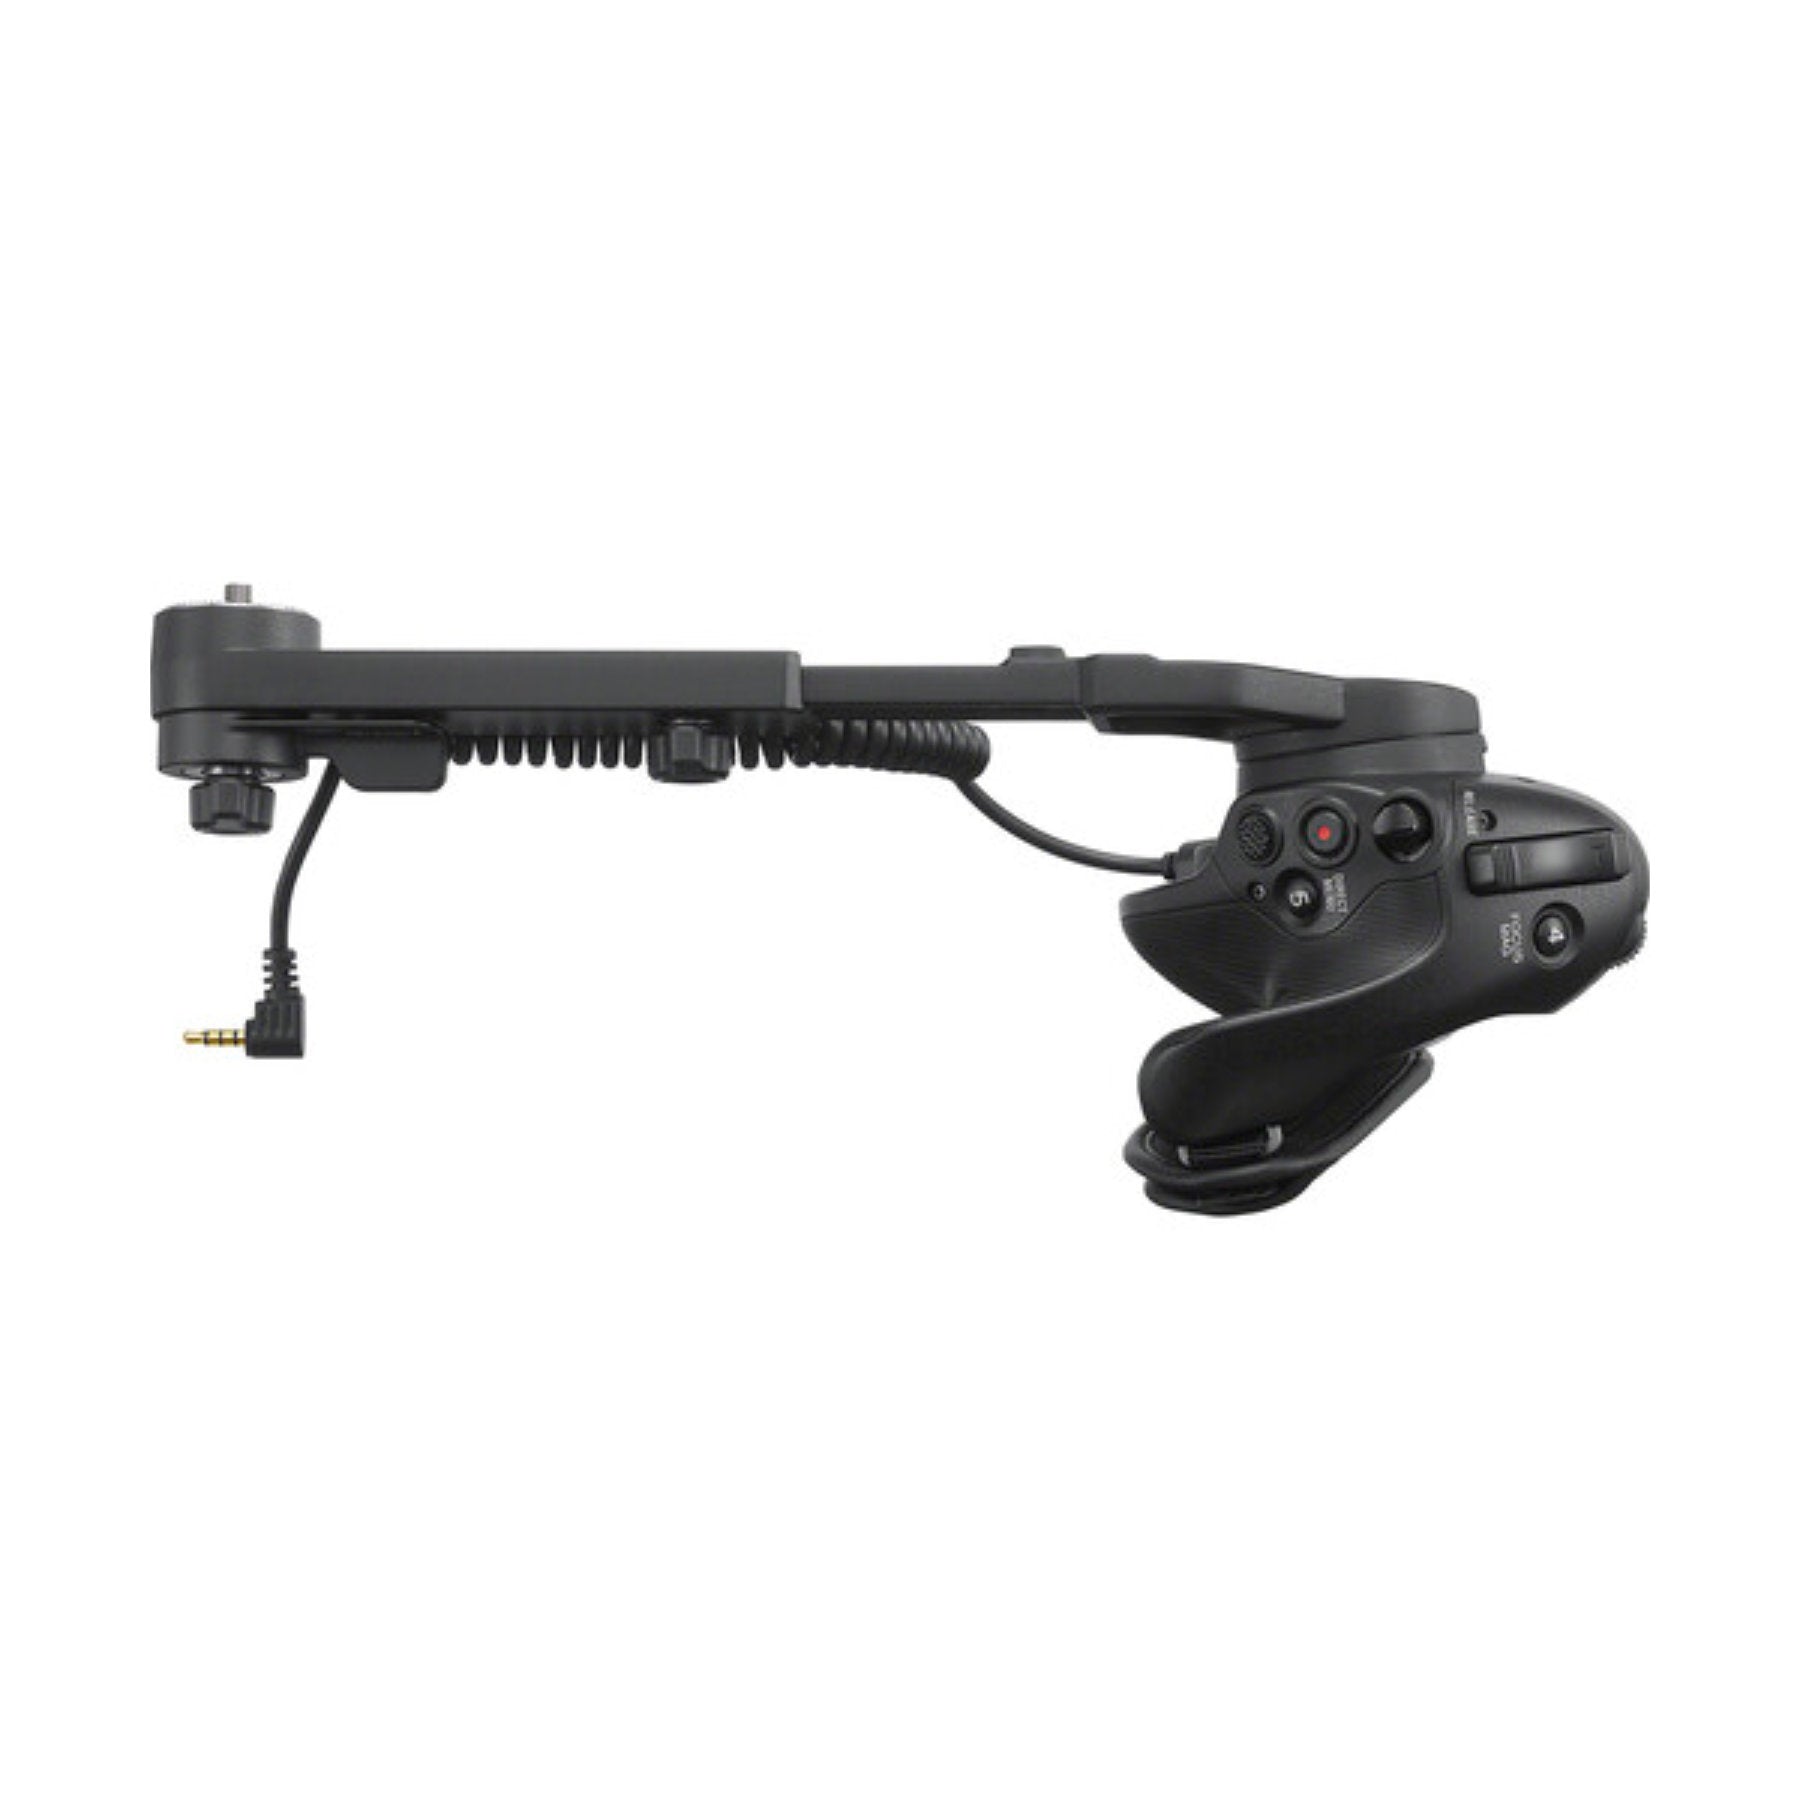 Buy Sony GP-VR100 Remote Control Grip at Topic Store